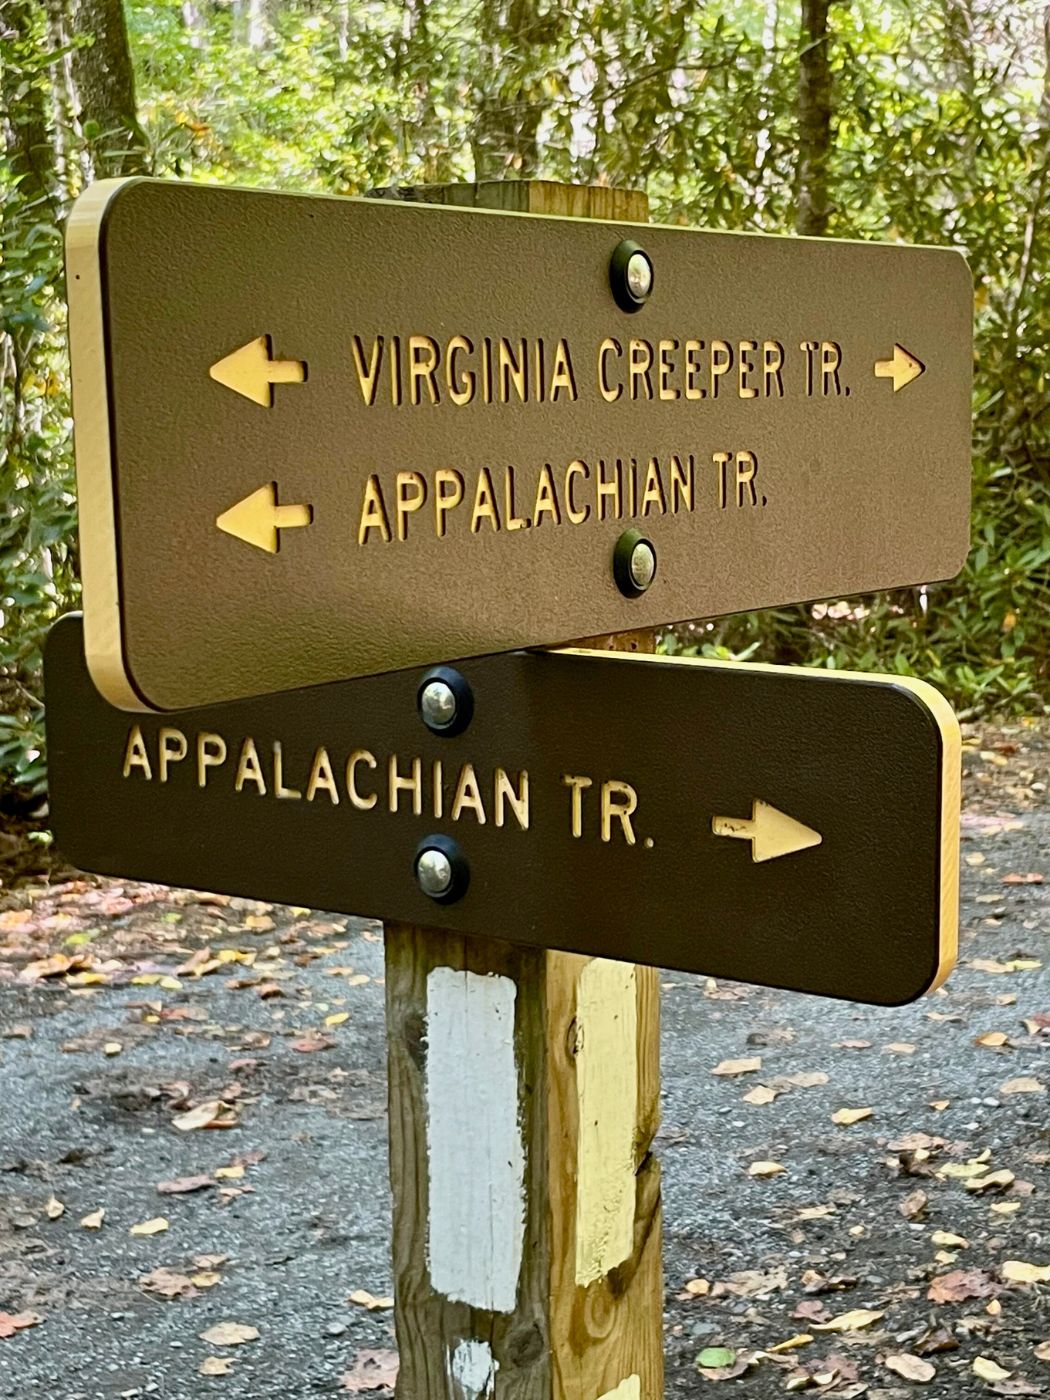 Virginia Creeper Trail and Appalachian Trail Intersection